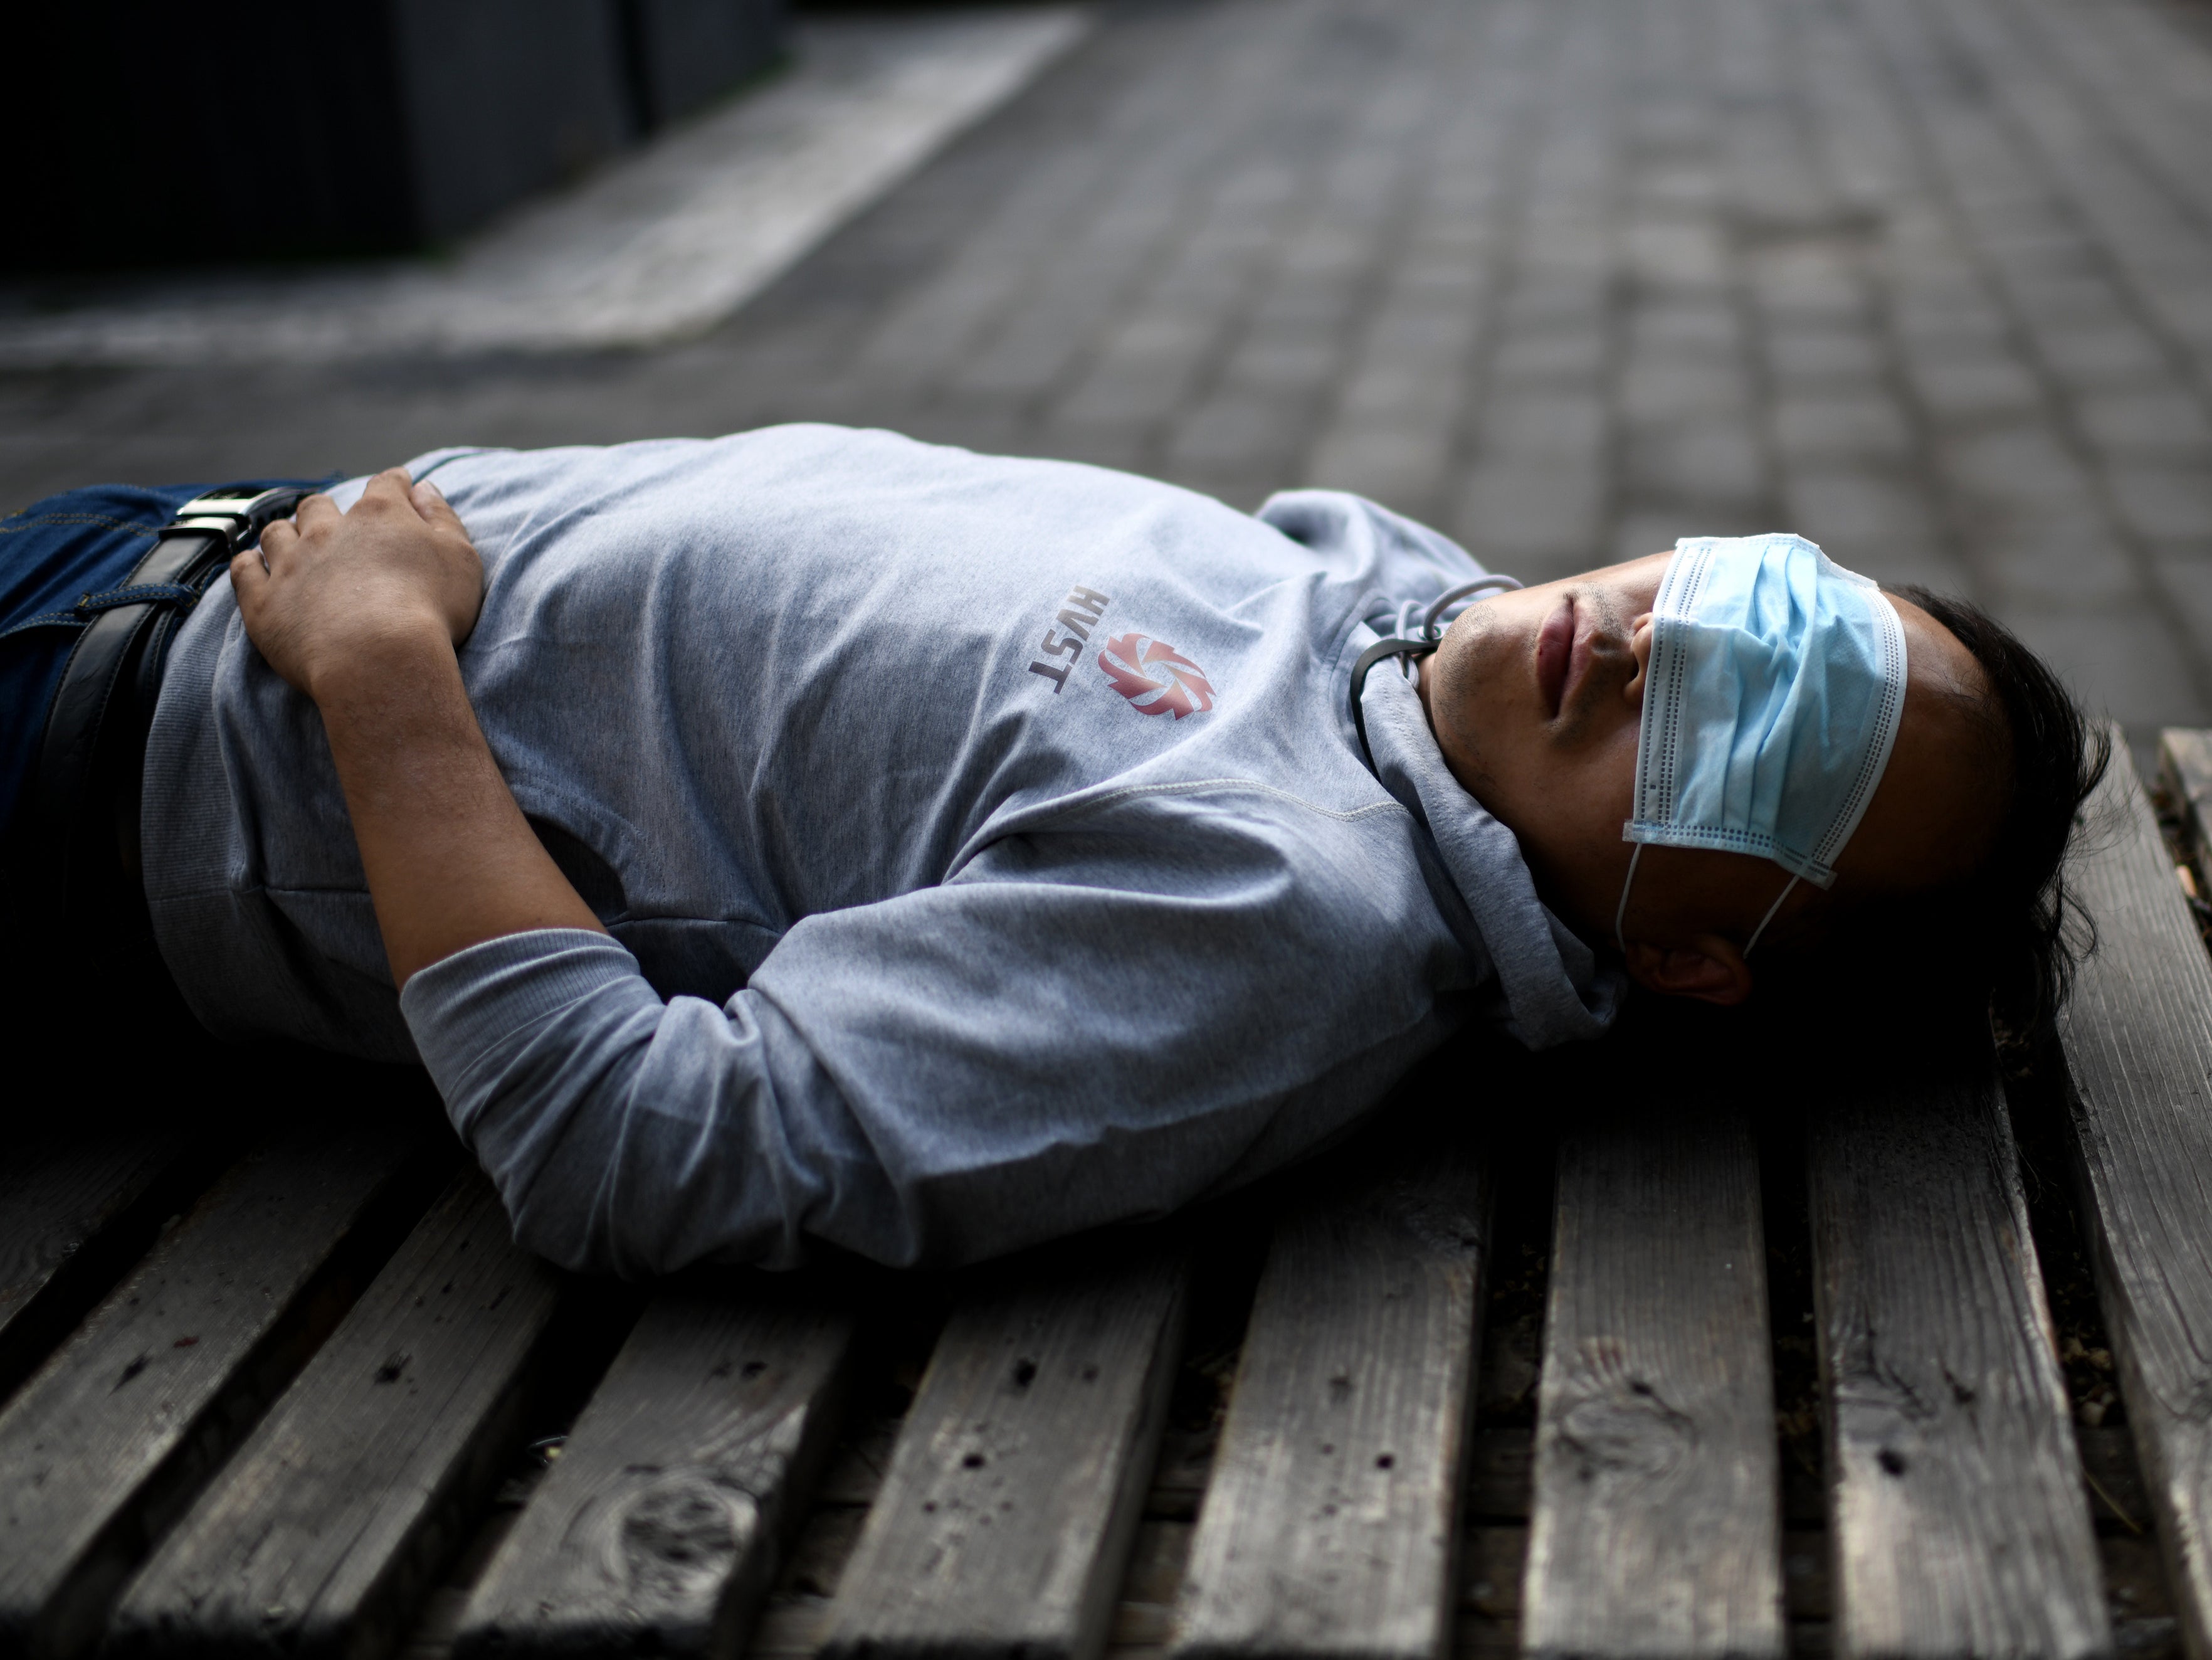 A man sleeps on a bench while wearing a face mask